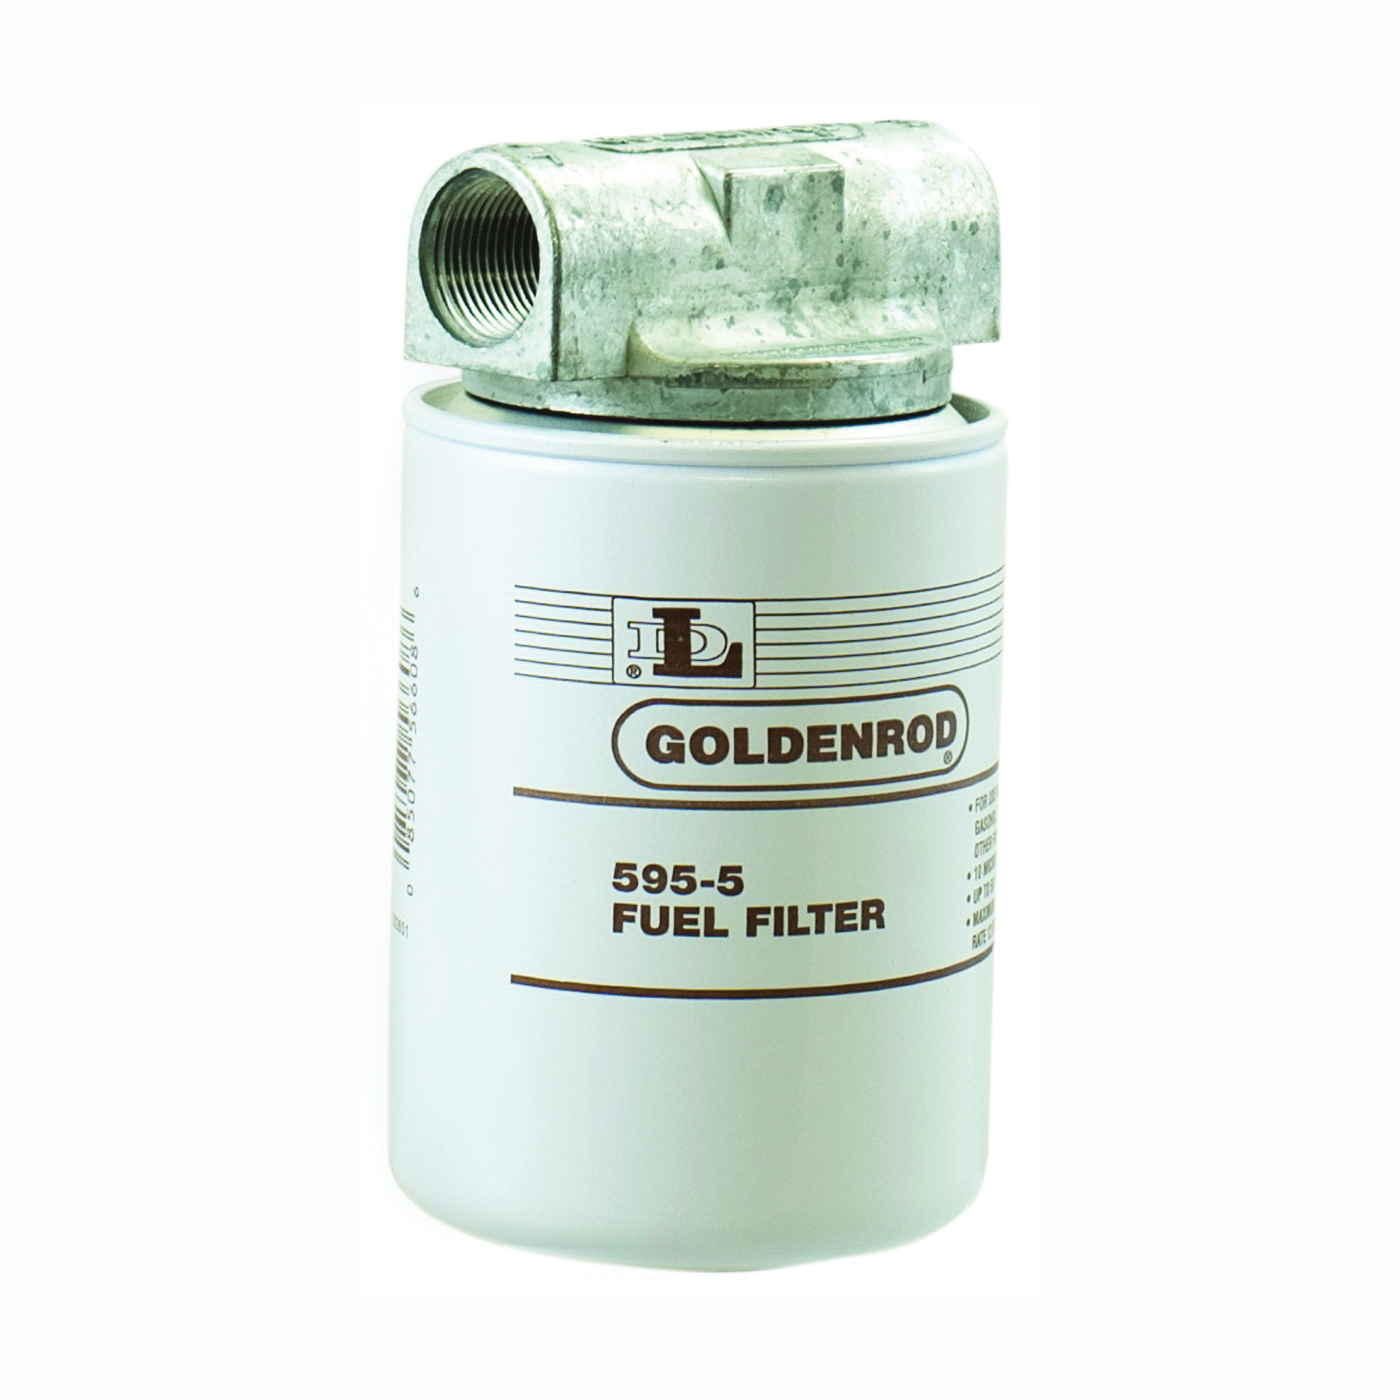 Goldenrod 595 Fuel Filter, 1 in Connection, NPT, 25 gpm